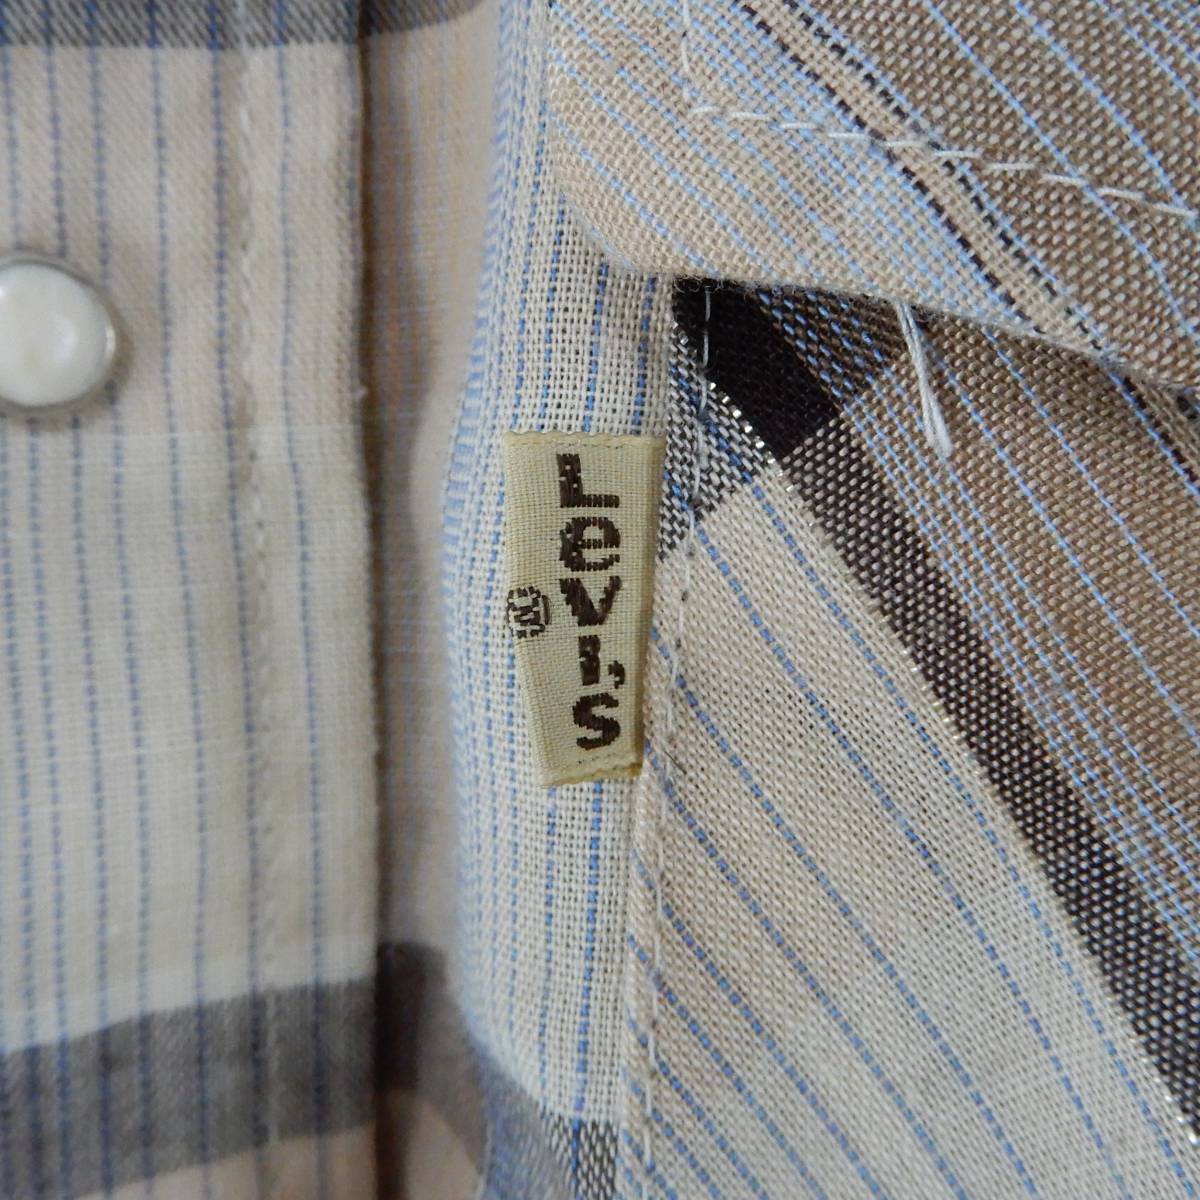 Levi's Western Shirts Made in USA 1980s 15 1/2-33 Vintage リーバイス ウェスタンシャツ アメリカ製 1980年代 ヴィンテージ_画像4